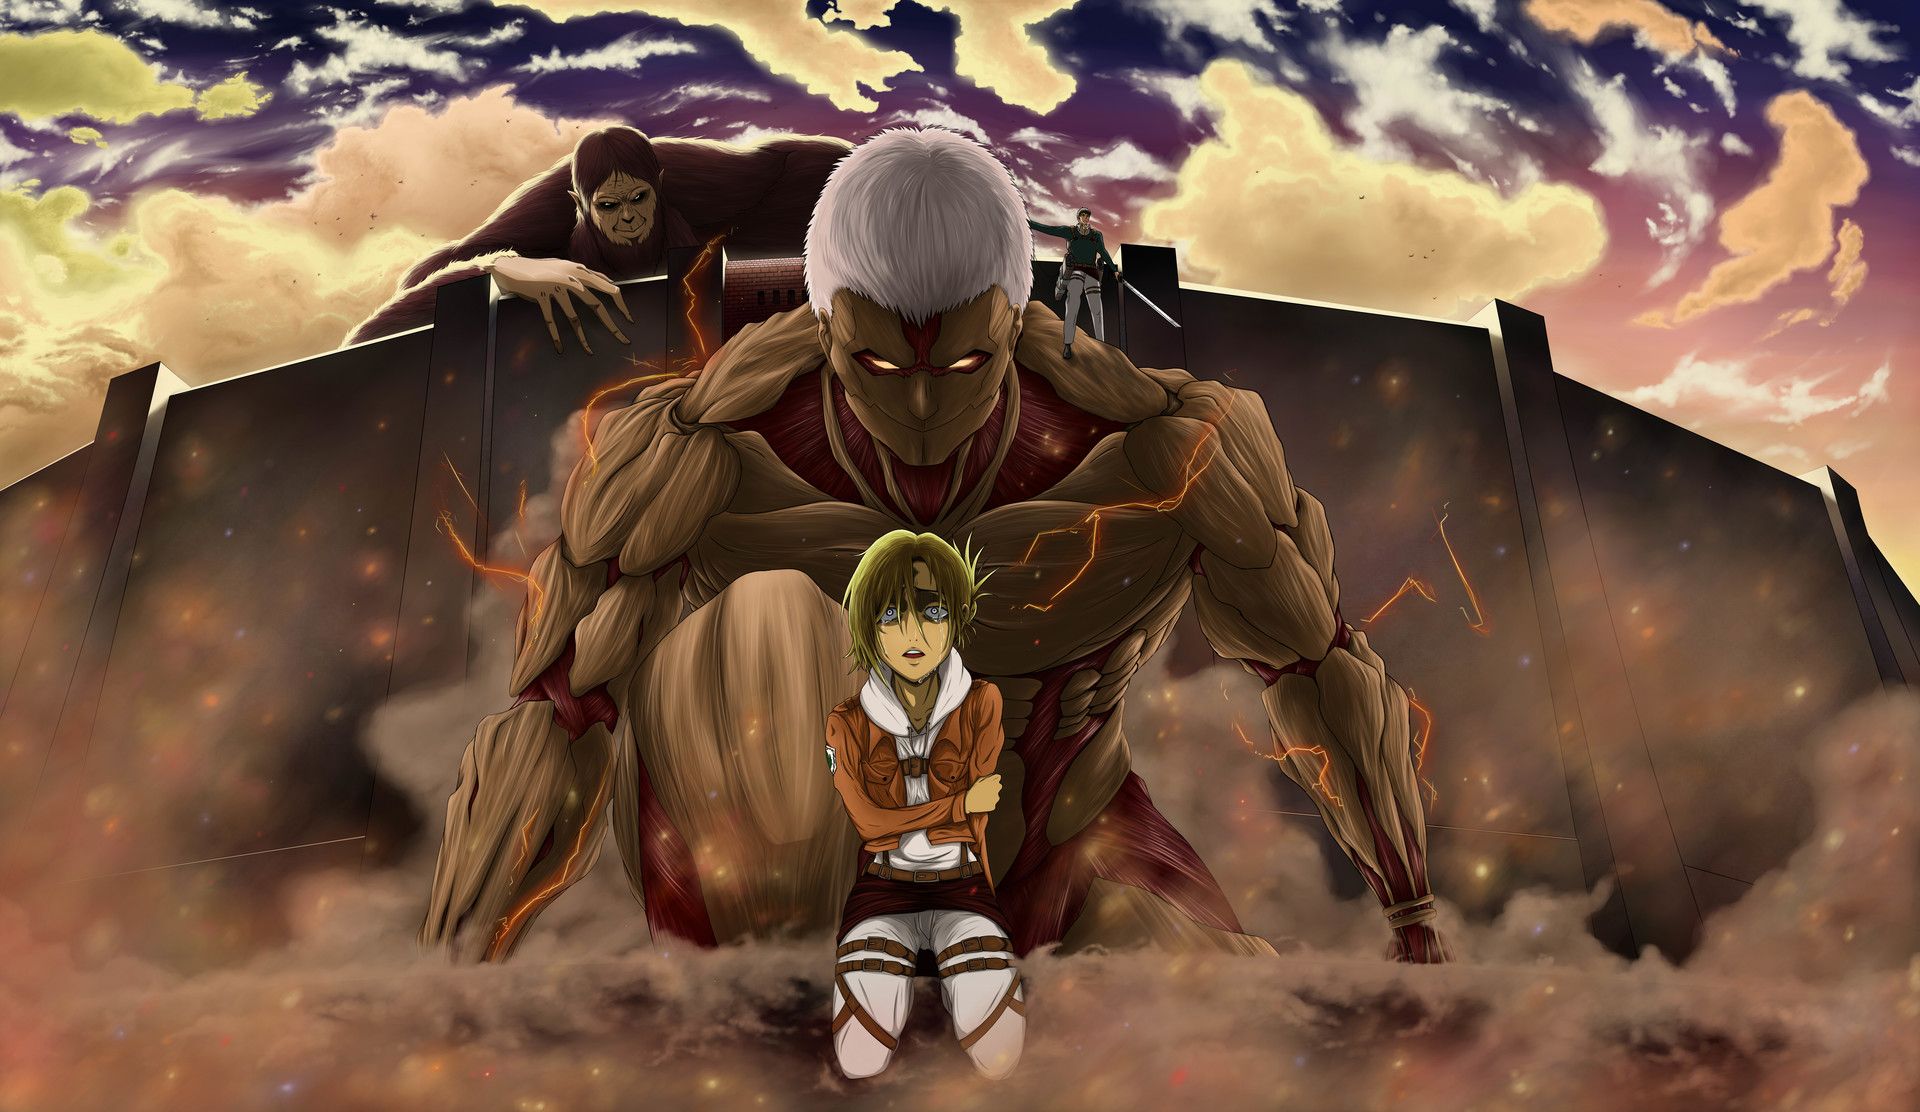 Armored Titan Wallpapers - Wallpaper Cave